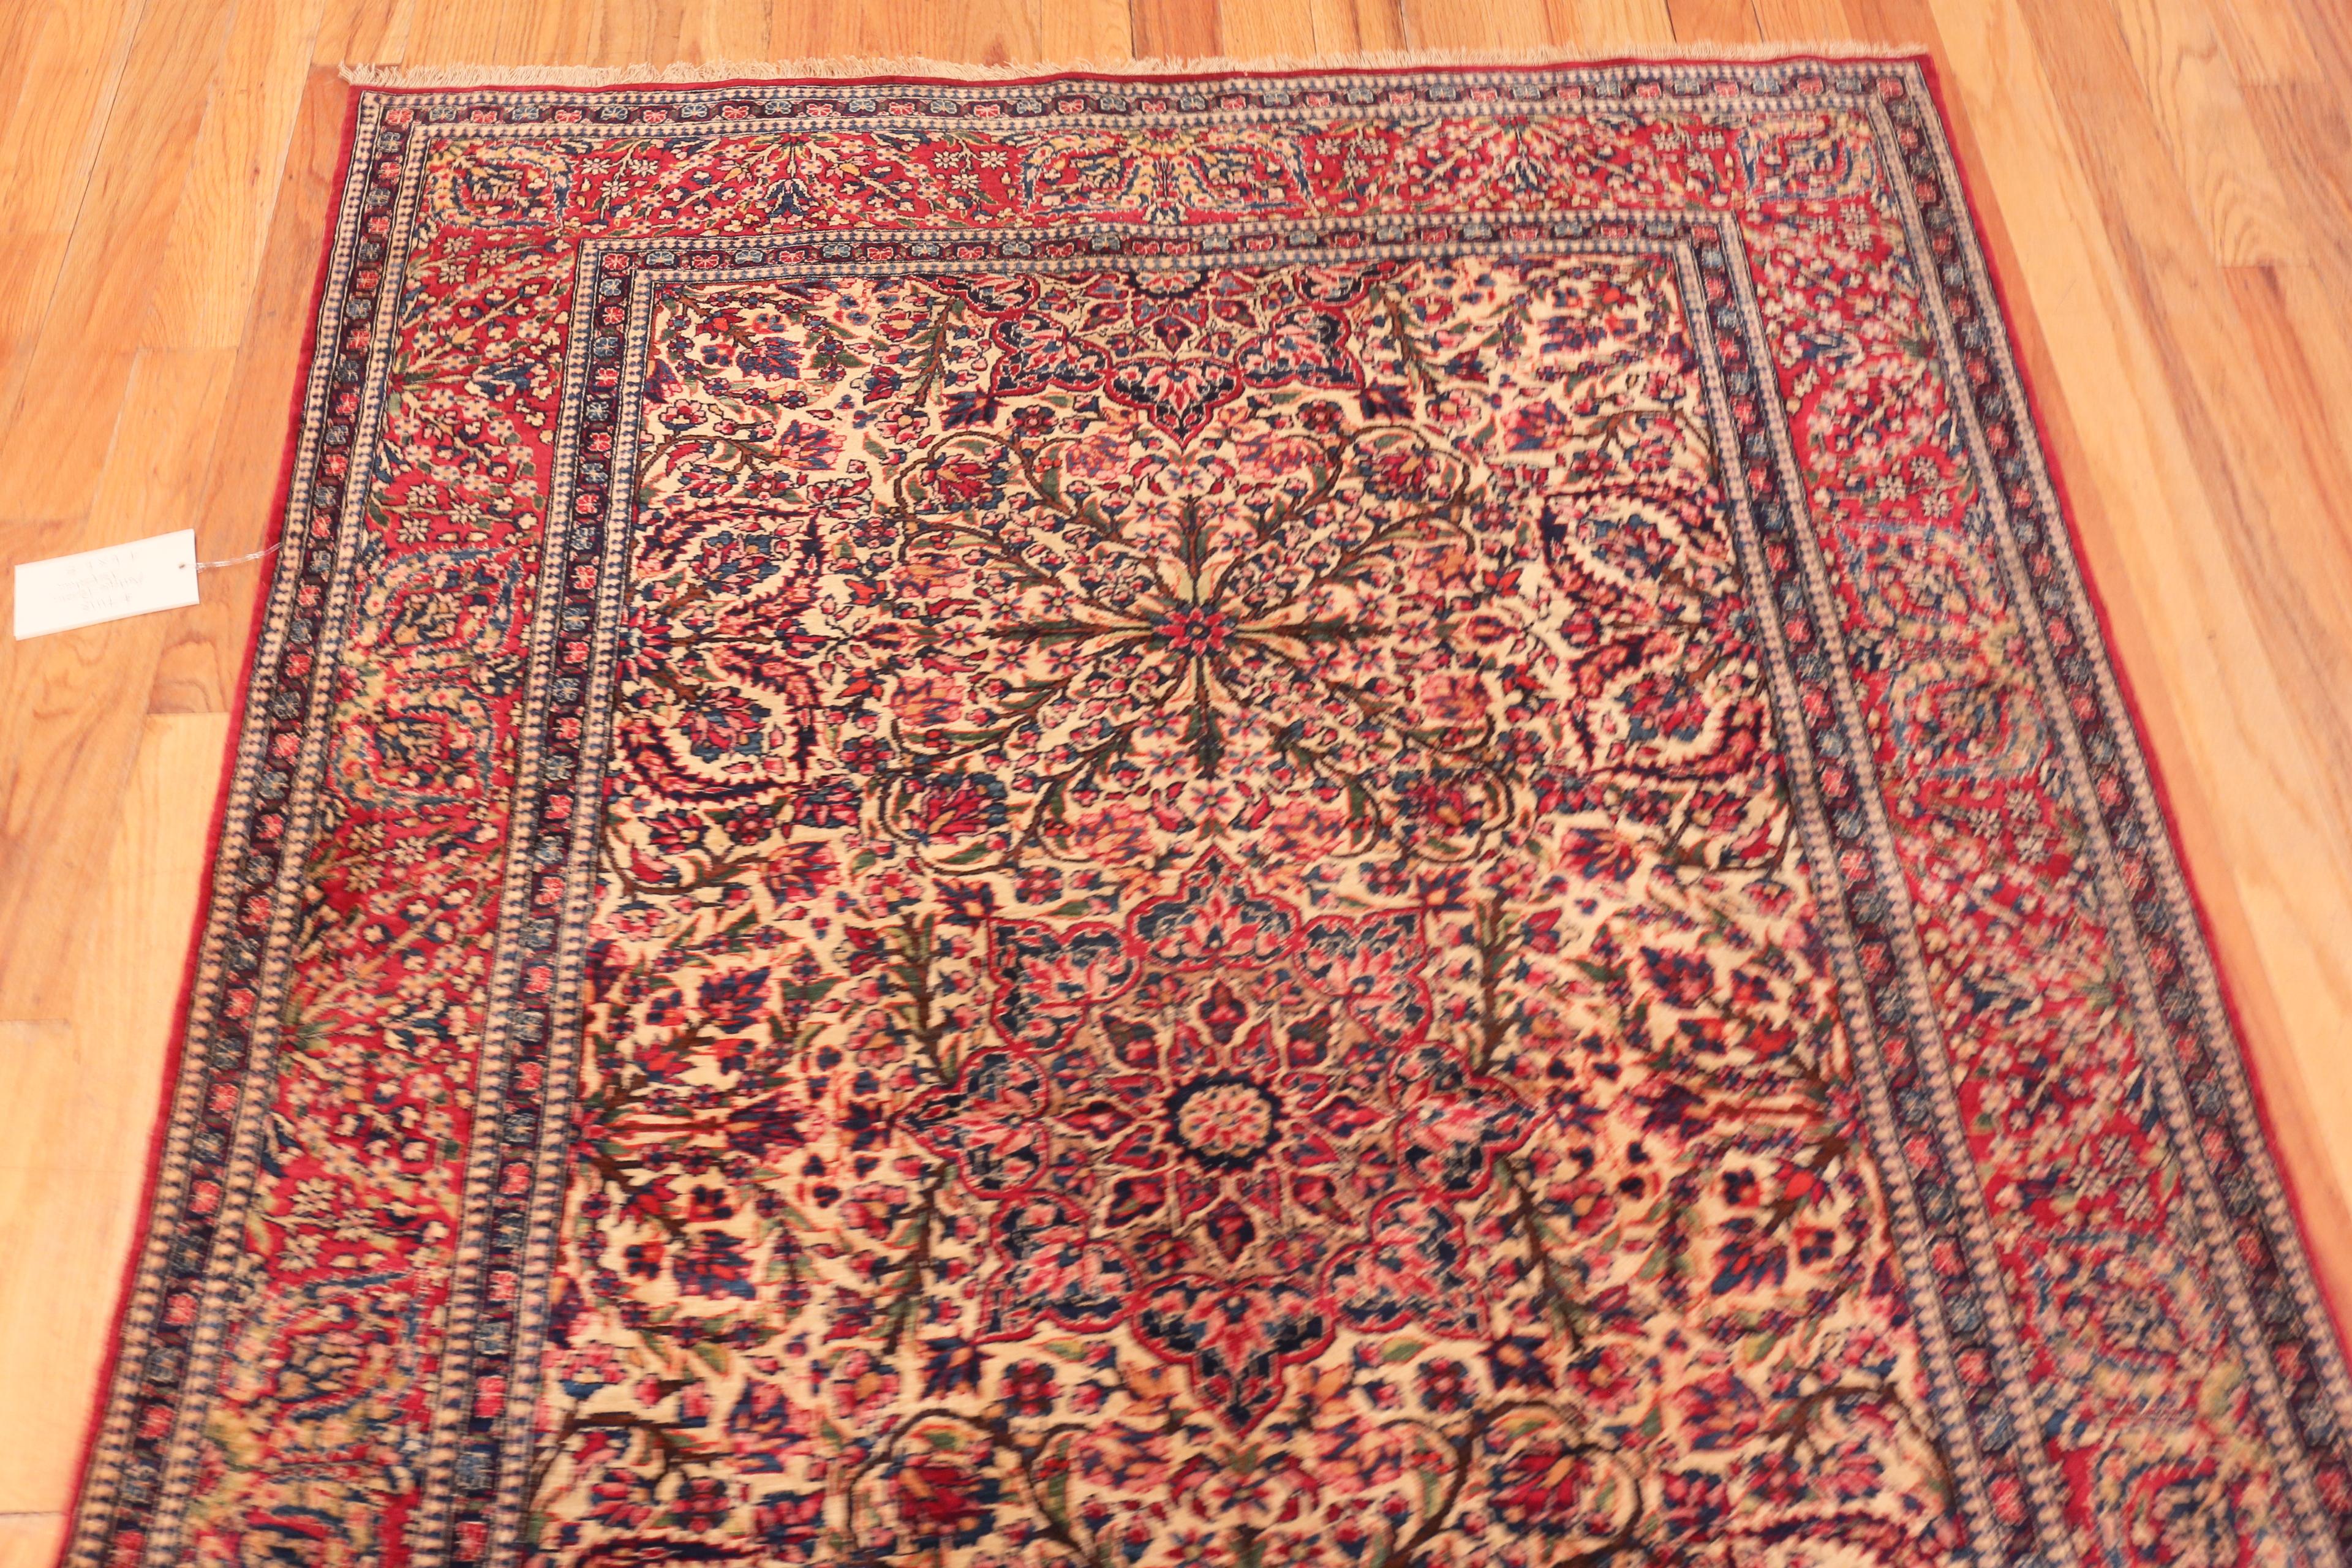 Magnificent Antique Persian Isfahan Rug, Country Of Origin / Rug Type: Persian Rug, Circa date: 1920. Size: 4 ft 6 in x 6 ft 8 in (1.37 m x 2.03 m)